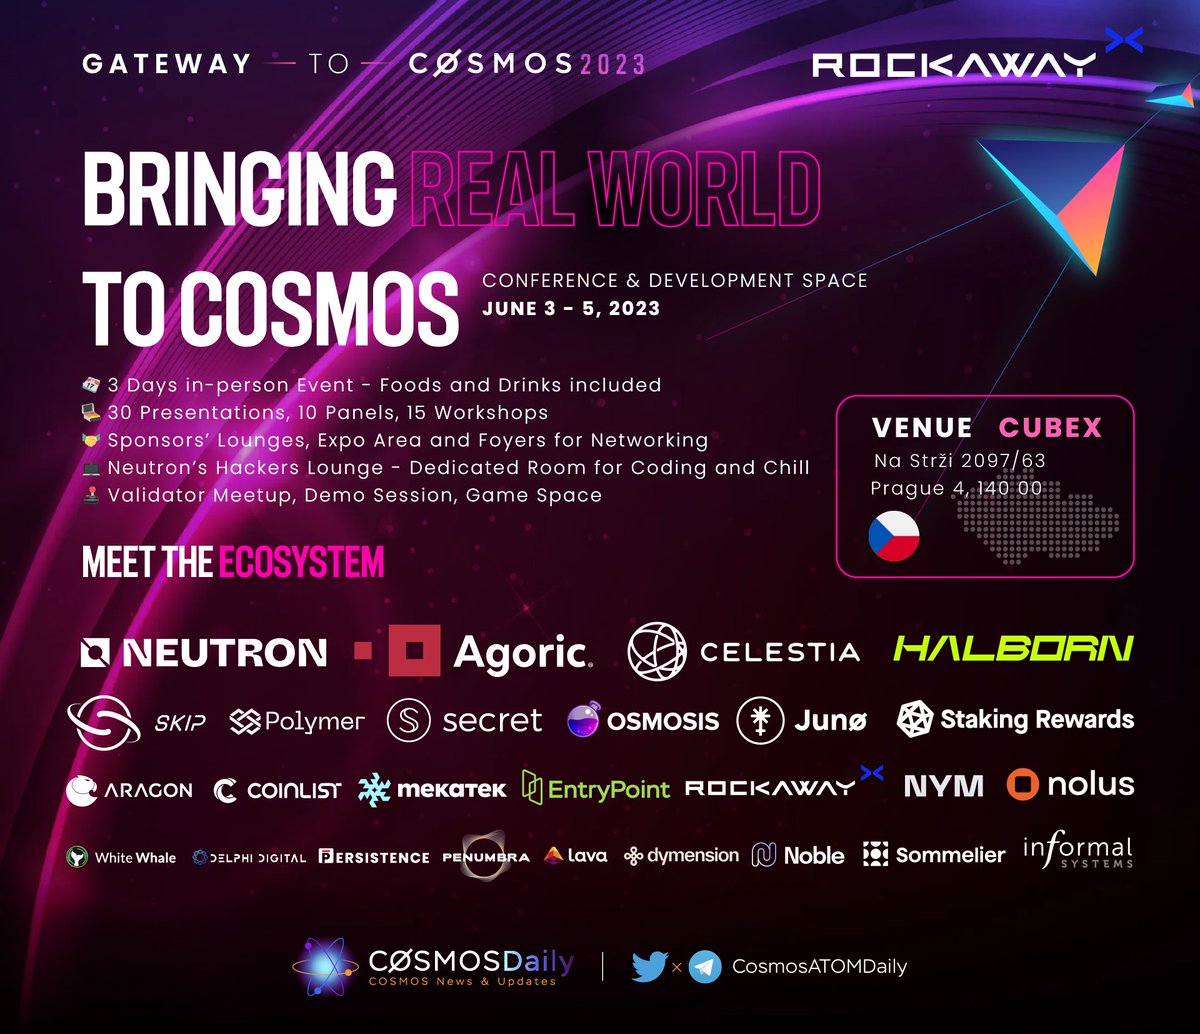 ⚛️ Gateway to Cosmos 2023: Bringing Real World to @cosmos

🏢Organized by @Rockaway_X

🤝 Connect with the community, expand your knowledge, and collaborate on building the future together!

📅 June 3-5, 2023
📍 Cubex, Prague, Czech

@Gateway_Conf
#Gateway #Cosmos